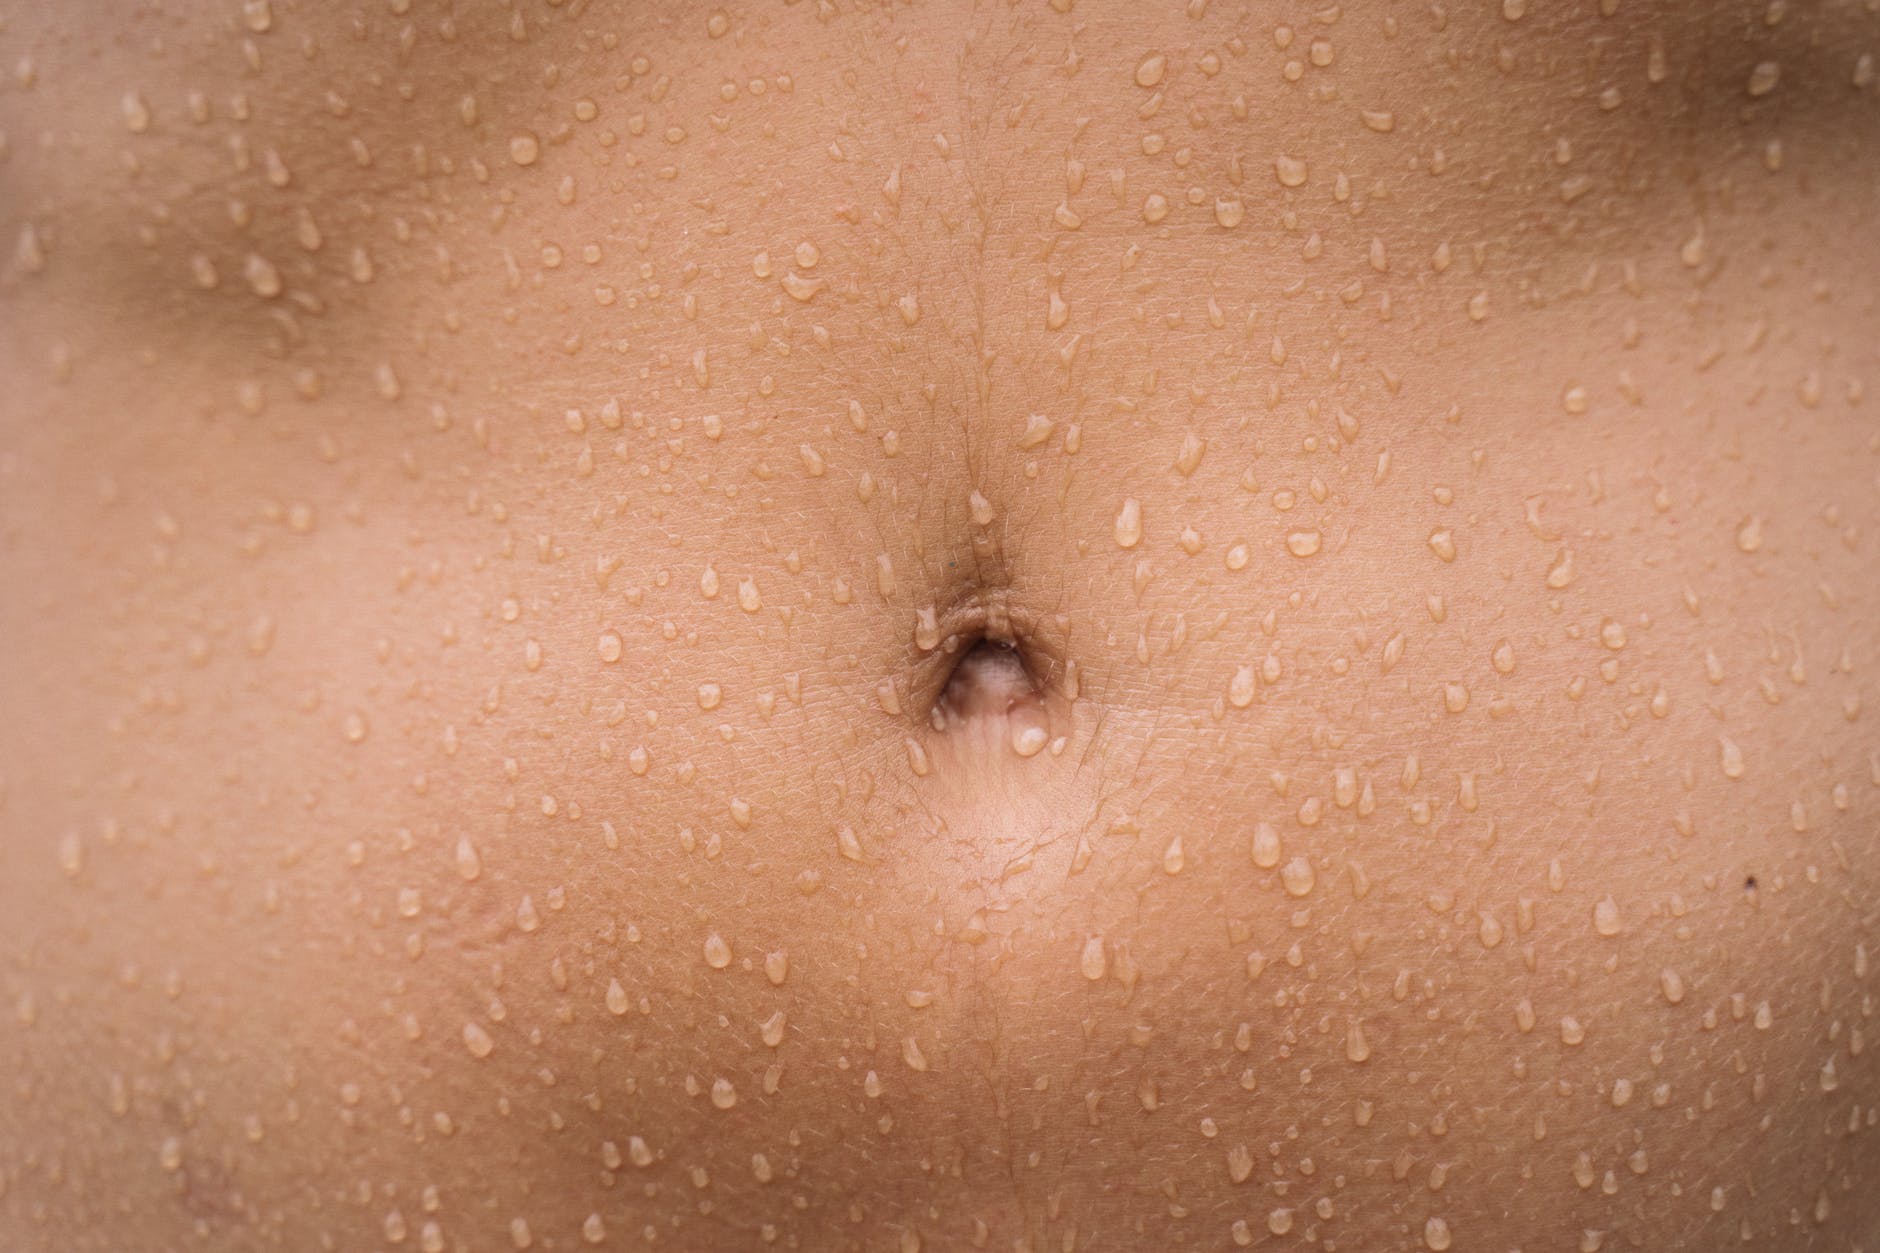 persons belly button with black hair